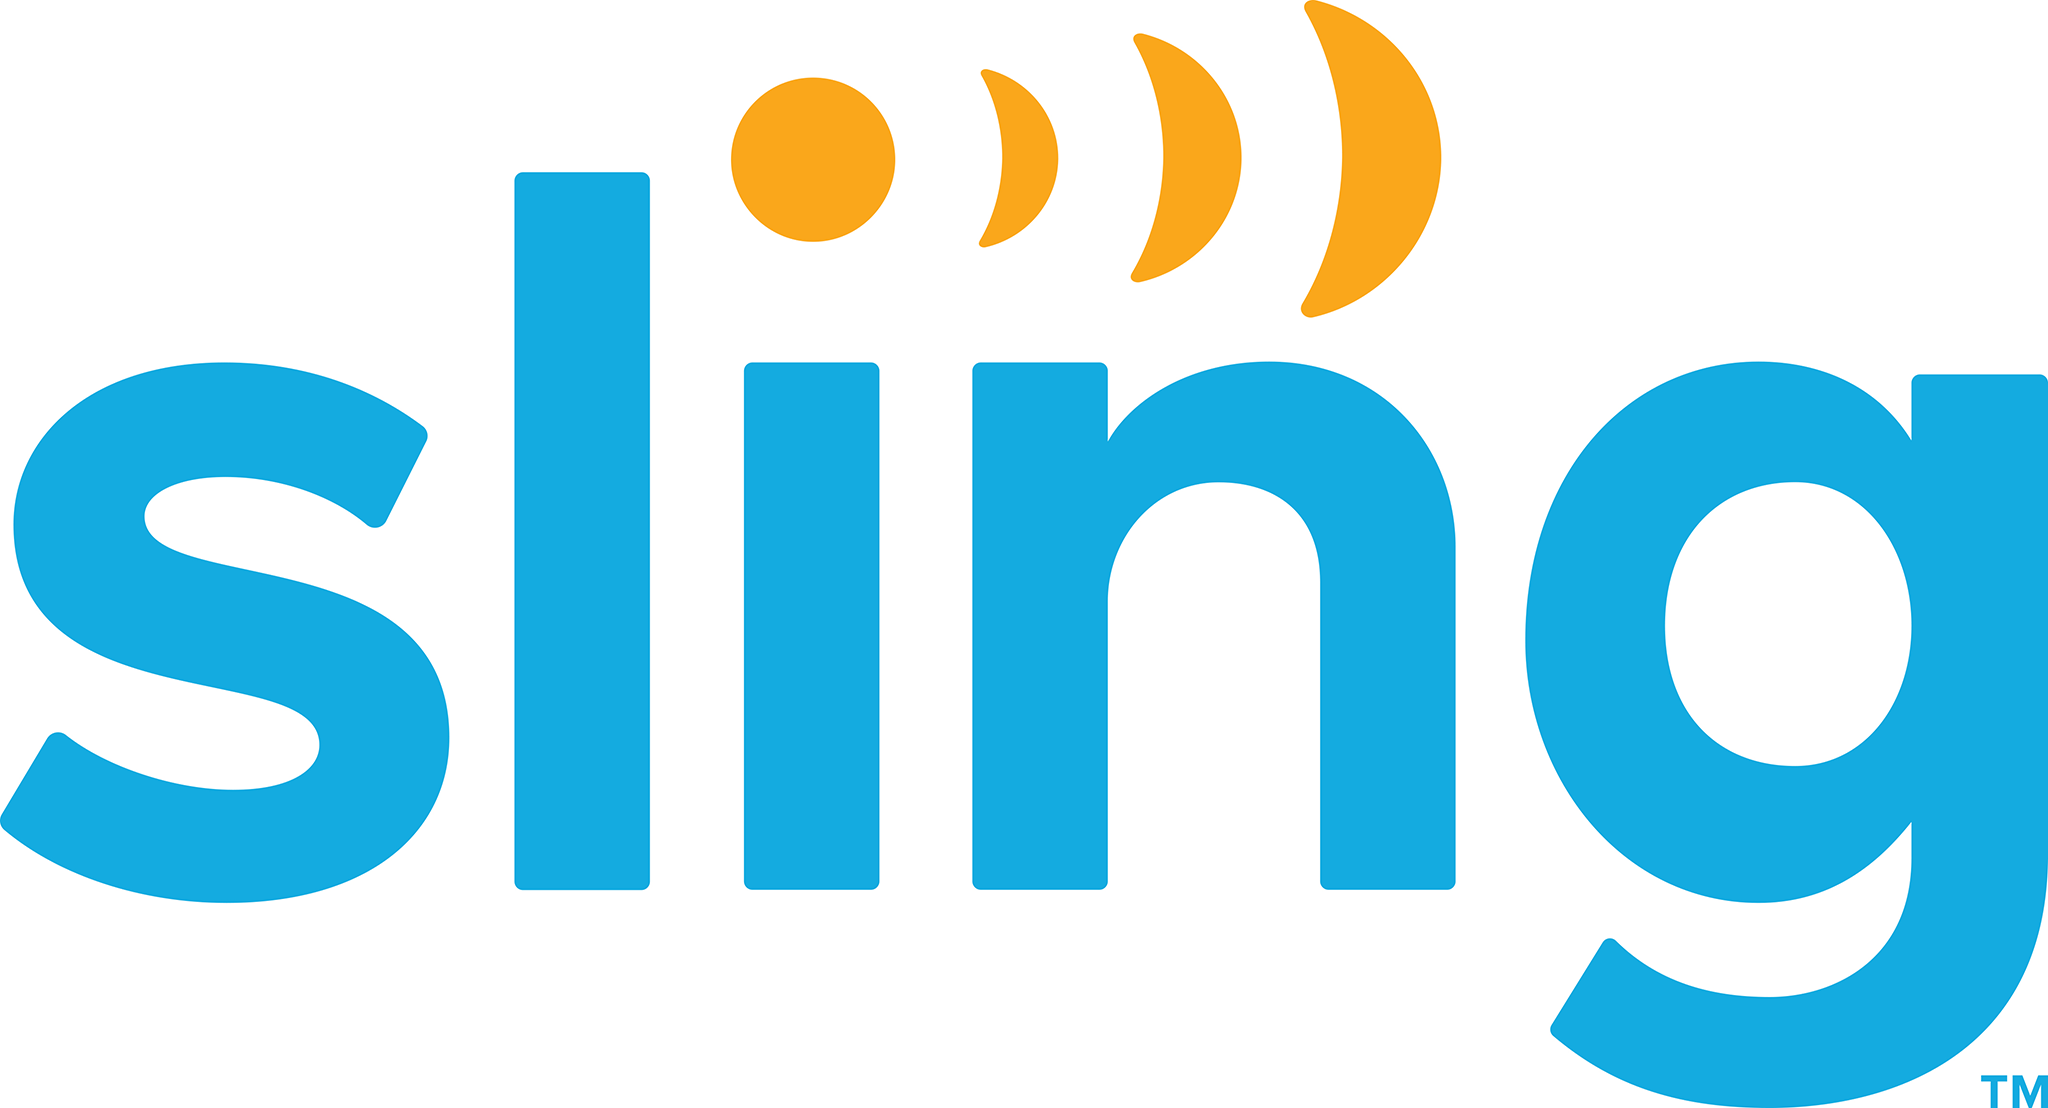 Last Day: Sign Up for 7 Days of Sling Blue for Free, No Credit Card Required